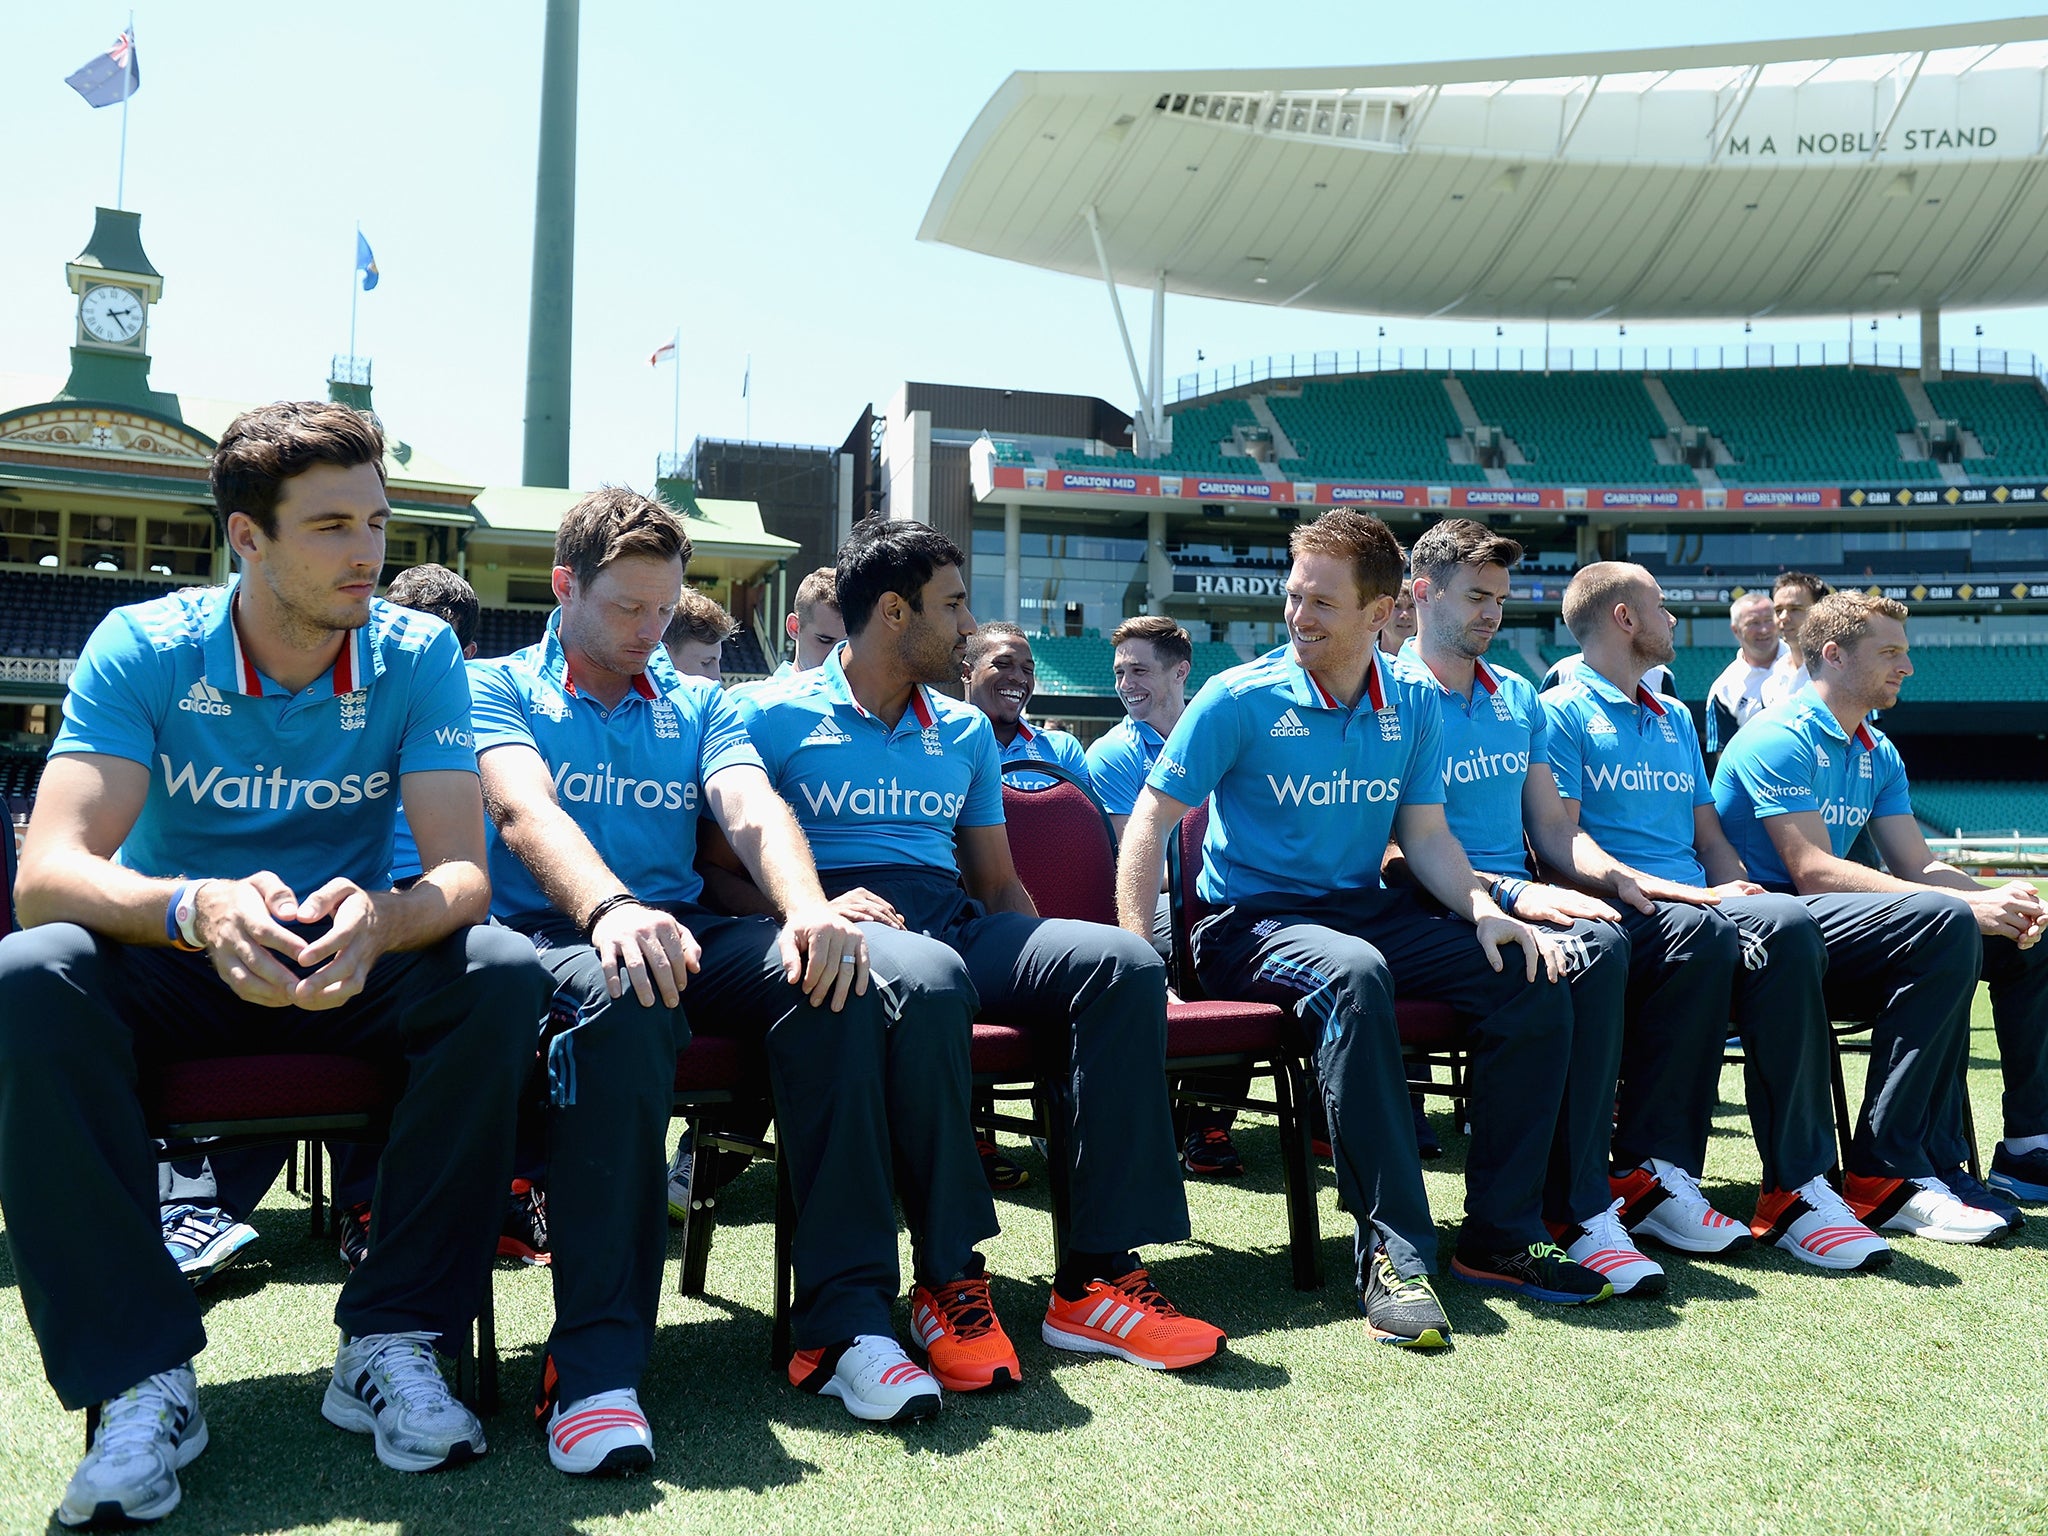 England captain Eoin Morgan shares a joke with his team before posing for a team photo at the Sydney Cricket Ground